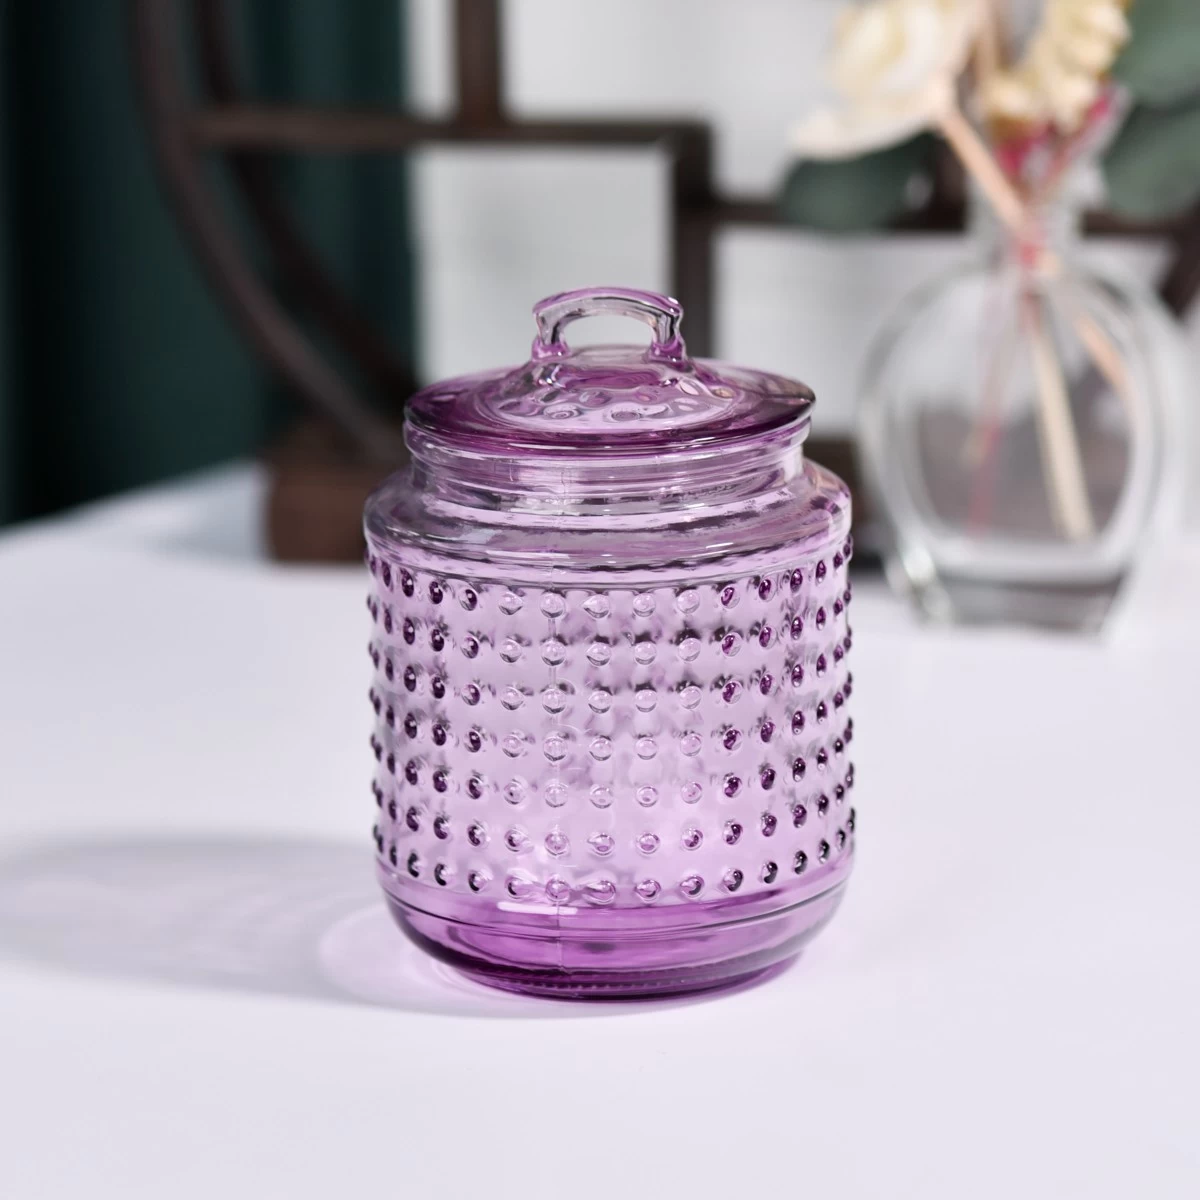 Bubble glass jars and lids for candle making from Sunny 